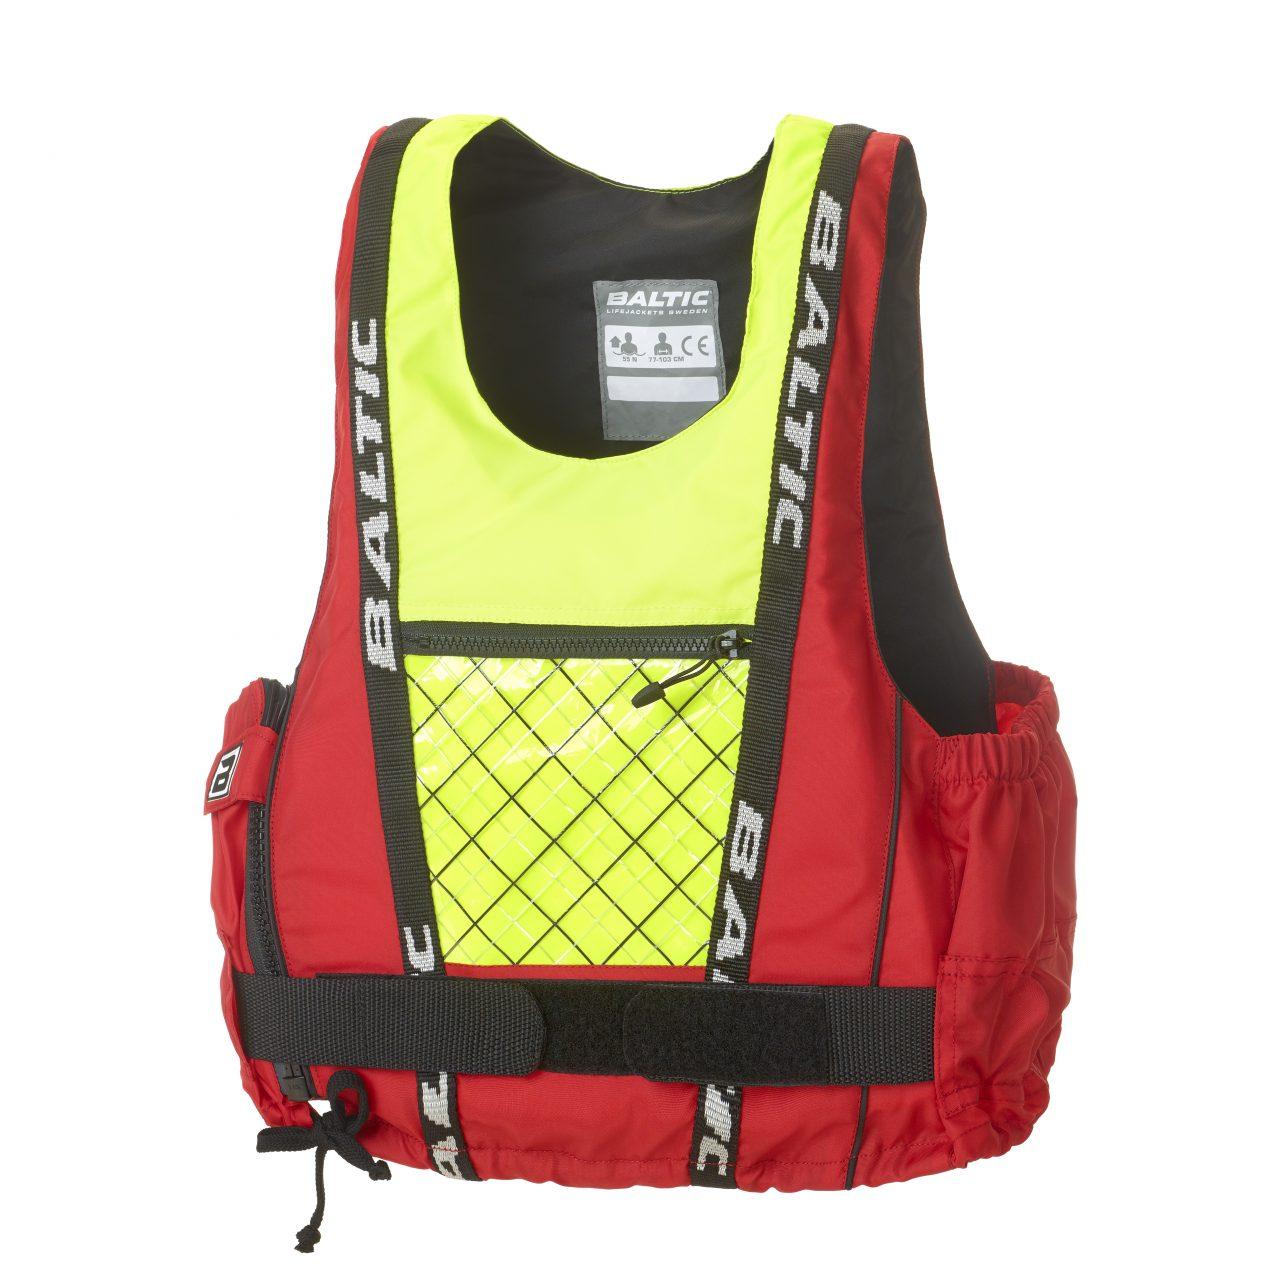 Baltic Safety 5701-003-4 BALTIC DINGHY PRO BUOYANCY AID the Swedish teams choice Adult M/L